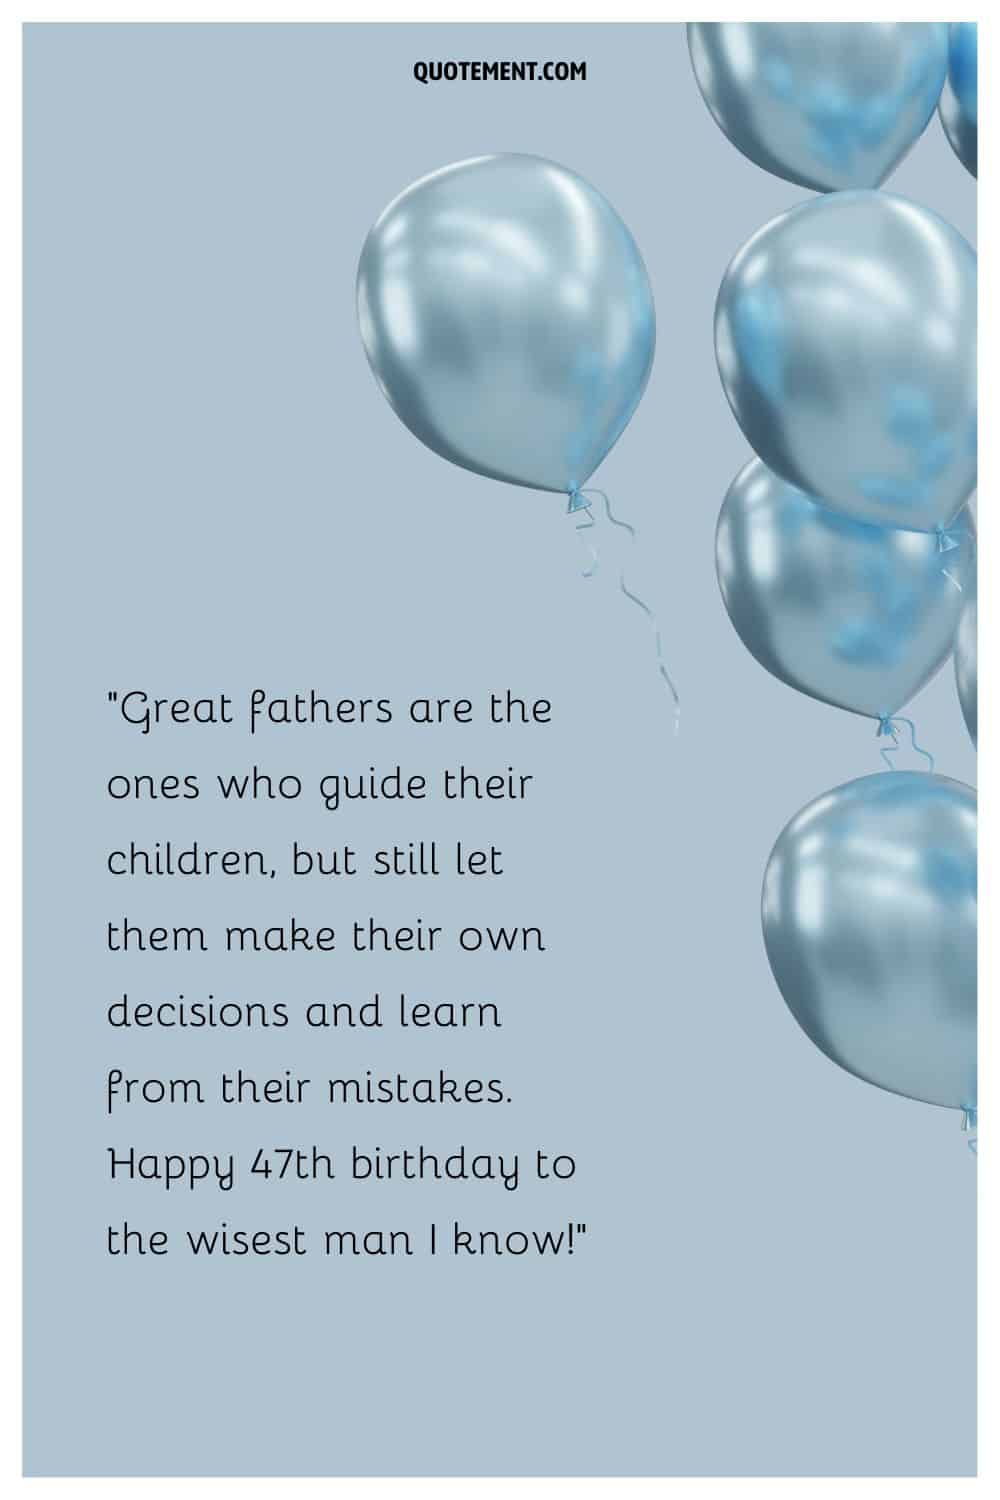 Sweet message for a father who turns 47 and balloons next to it
